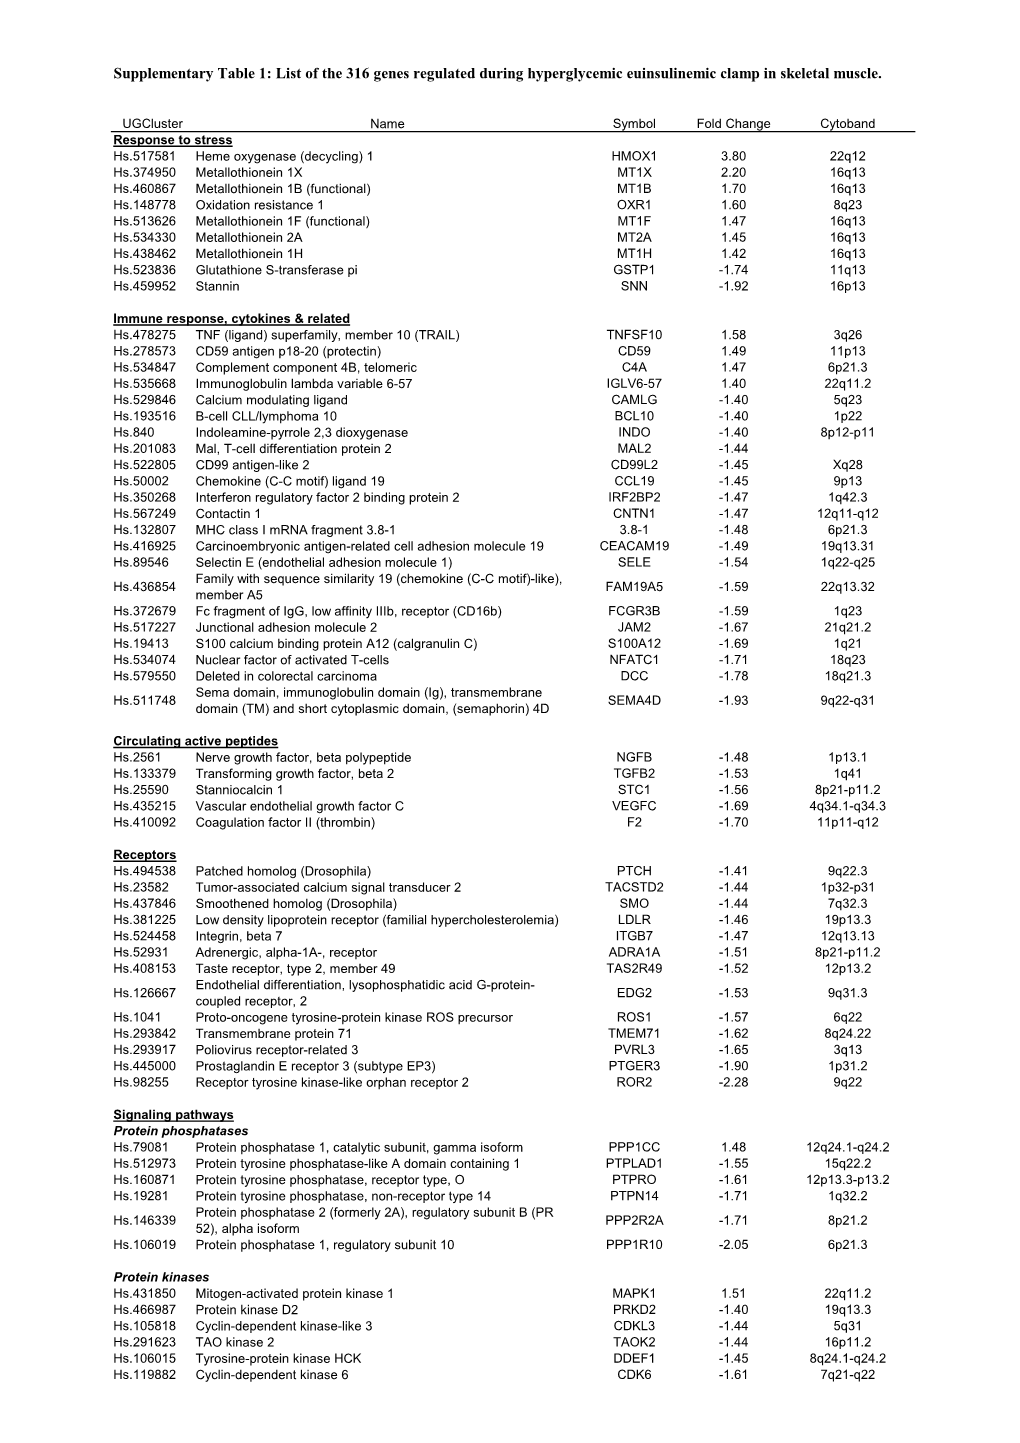 Supplementary Table 1: List of the 316 Genes Regulated During Hyperglycemic Euinsulinemic Clamp in Skeletal Muscle